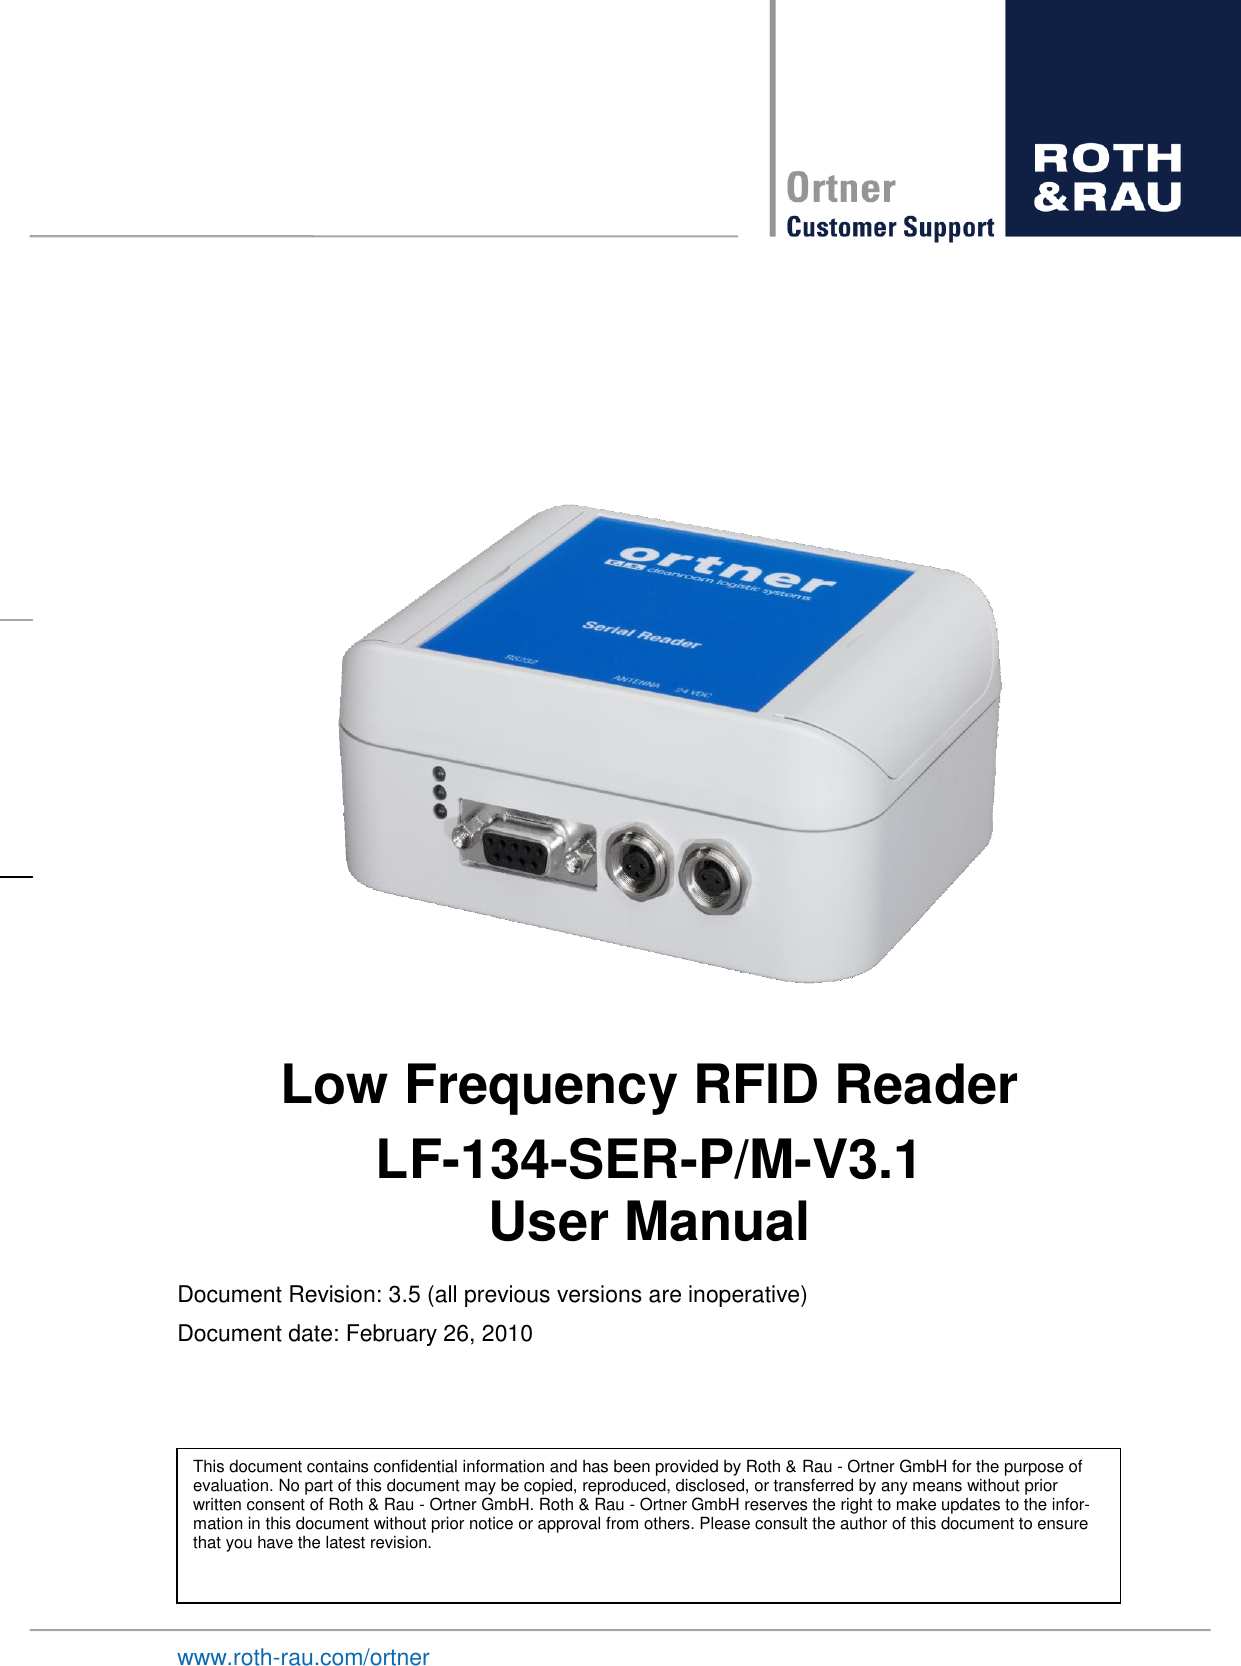    www.roth-rau.com/ortner Low Frequency RFID Reader LF-134-SER-P/M-V3.1 User Manual Document Revision: 3.5 (all previous versions are inoperative) Document date: February 26, 2010             This document contains confidential information and has been provided by Roth &amp; Rau - Ortner GmbH for the purpose of evaluation. No part of this document may be copied, reproduced, disclosed, or transferred by any means without prior written consent of Roth &amp; Rau - Ortner GmbH. Roth &amp; Rau - Ortner GmbH reserves the right to make updates to the infor-mation in this document without prior notice or approval from others. Please consult the author of this document to ensure that you have the latest revision.  